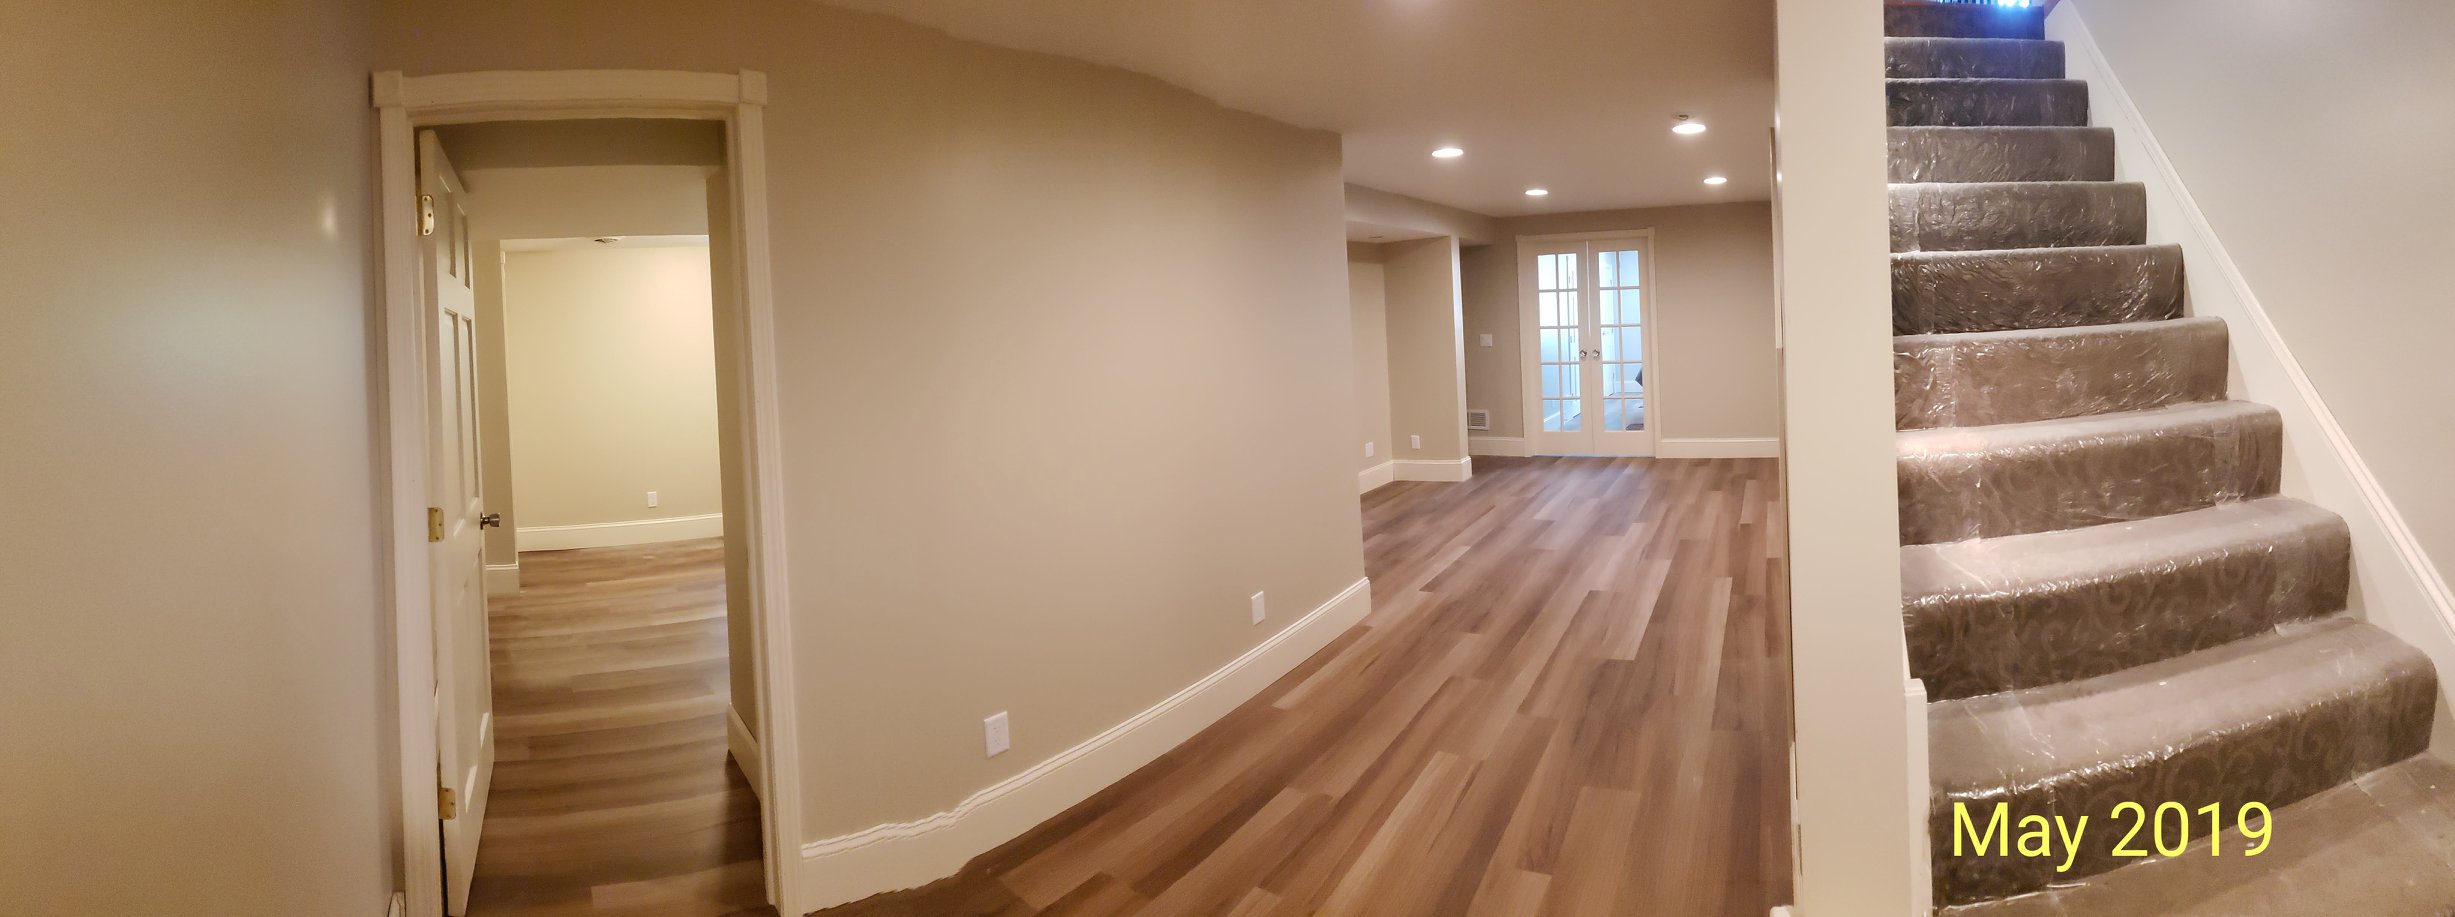 Panoramic view of a finished basement as seen in May of 2019.